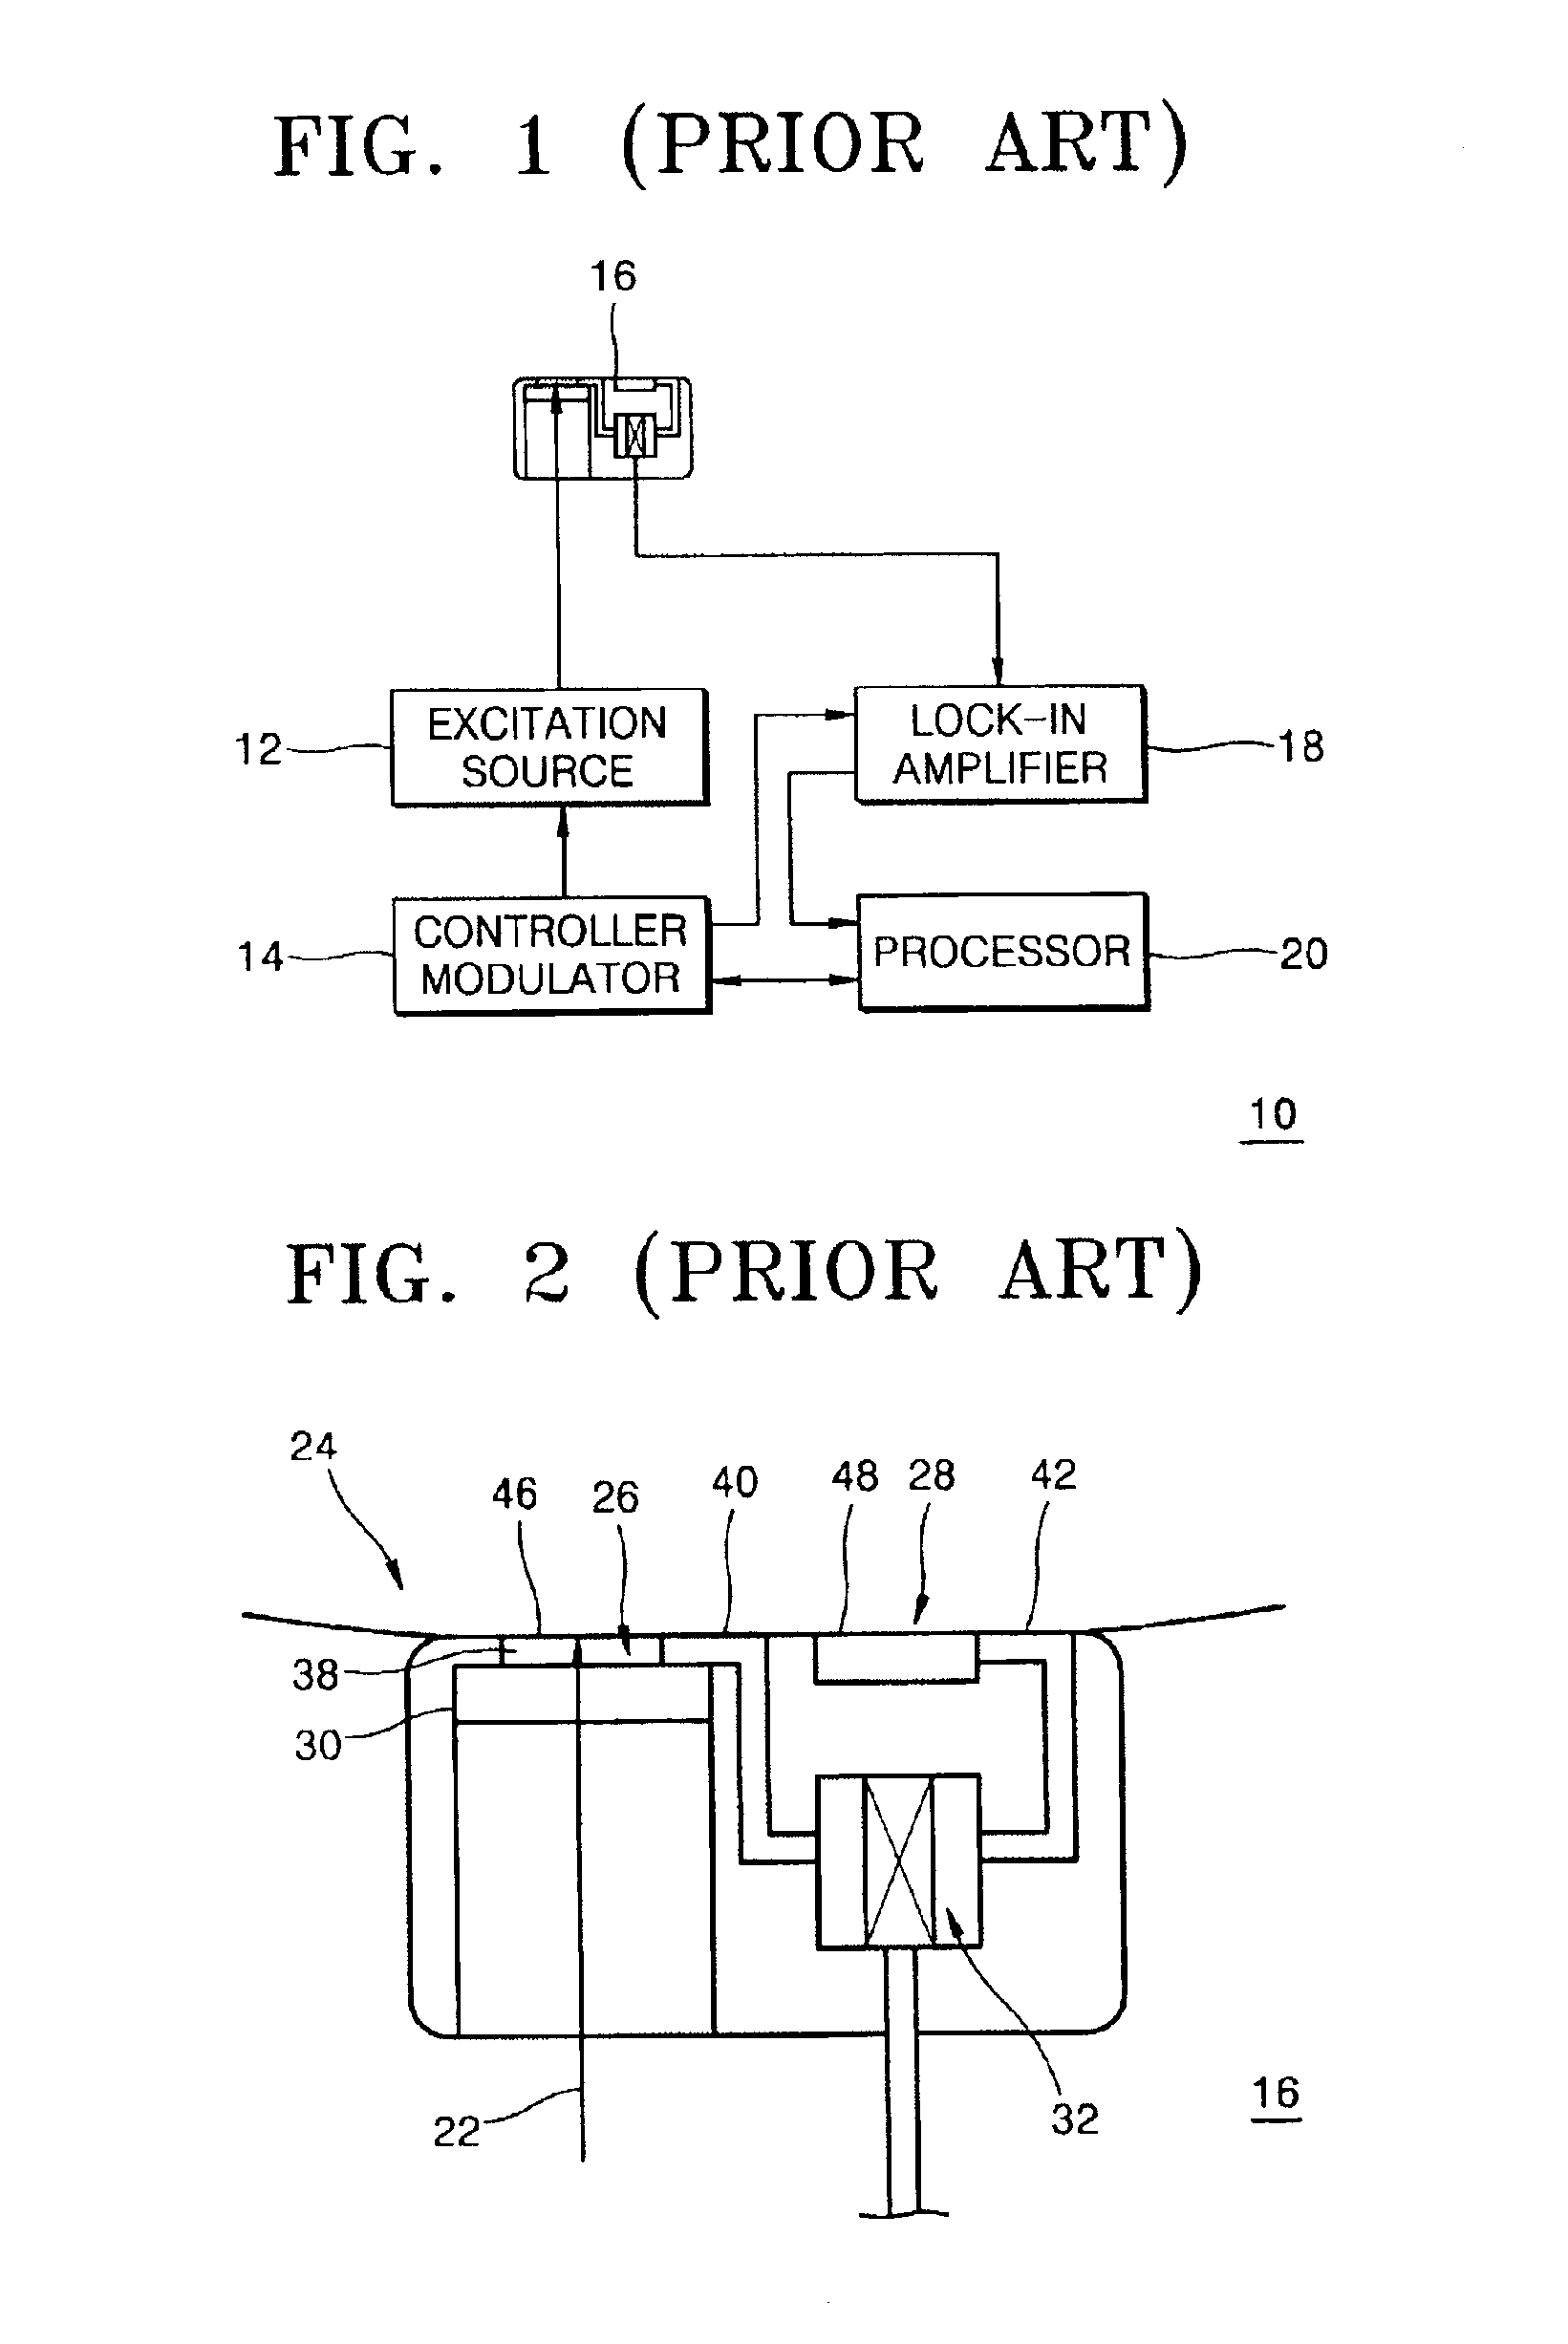 Apparatus and method for non-invasively measuring bio-fluid concentrations using photoacoustic spectroscopy